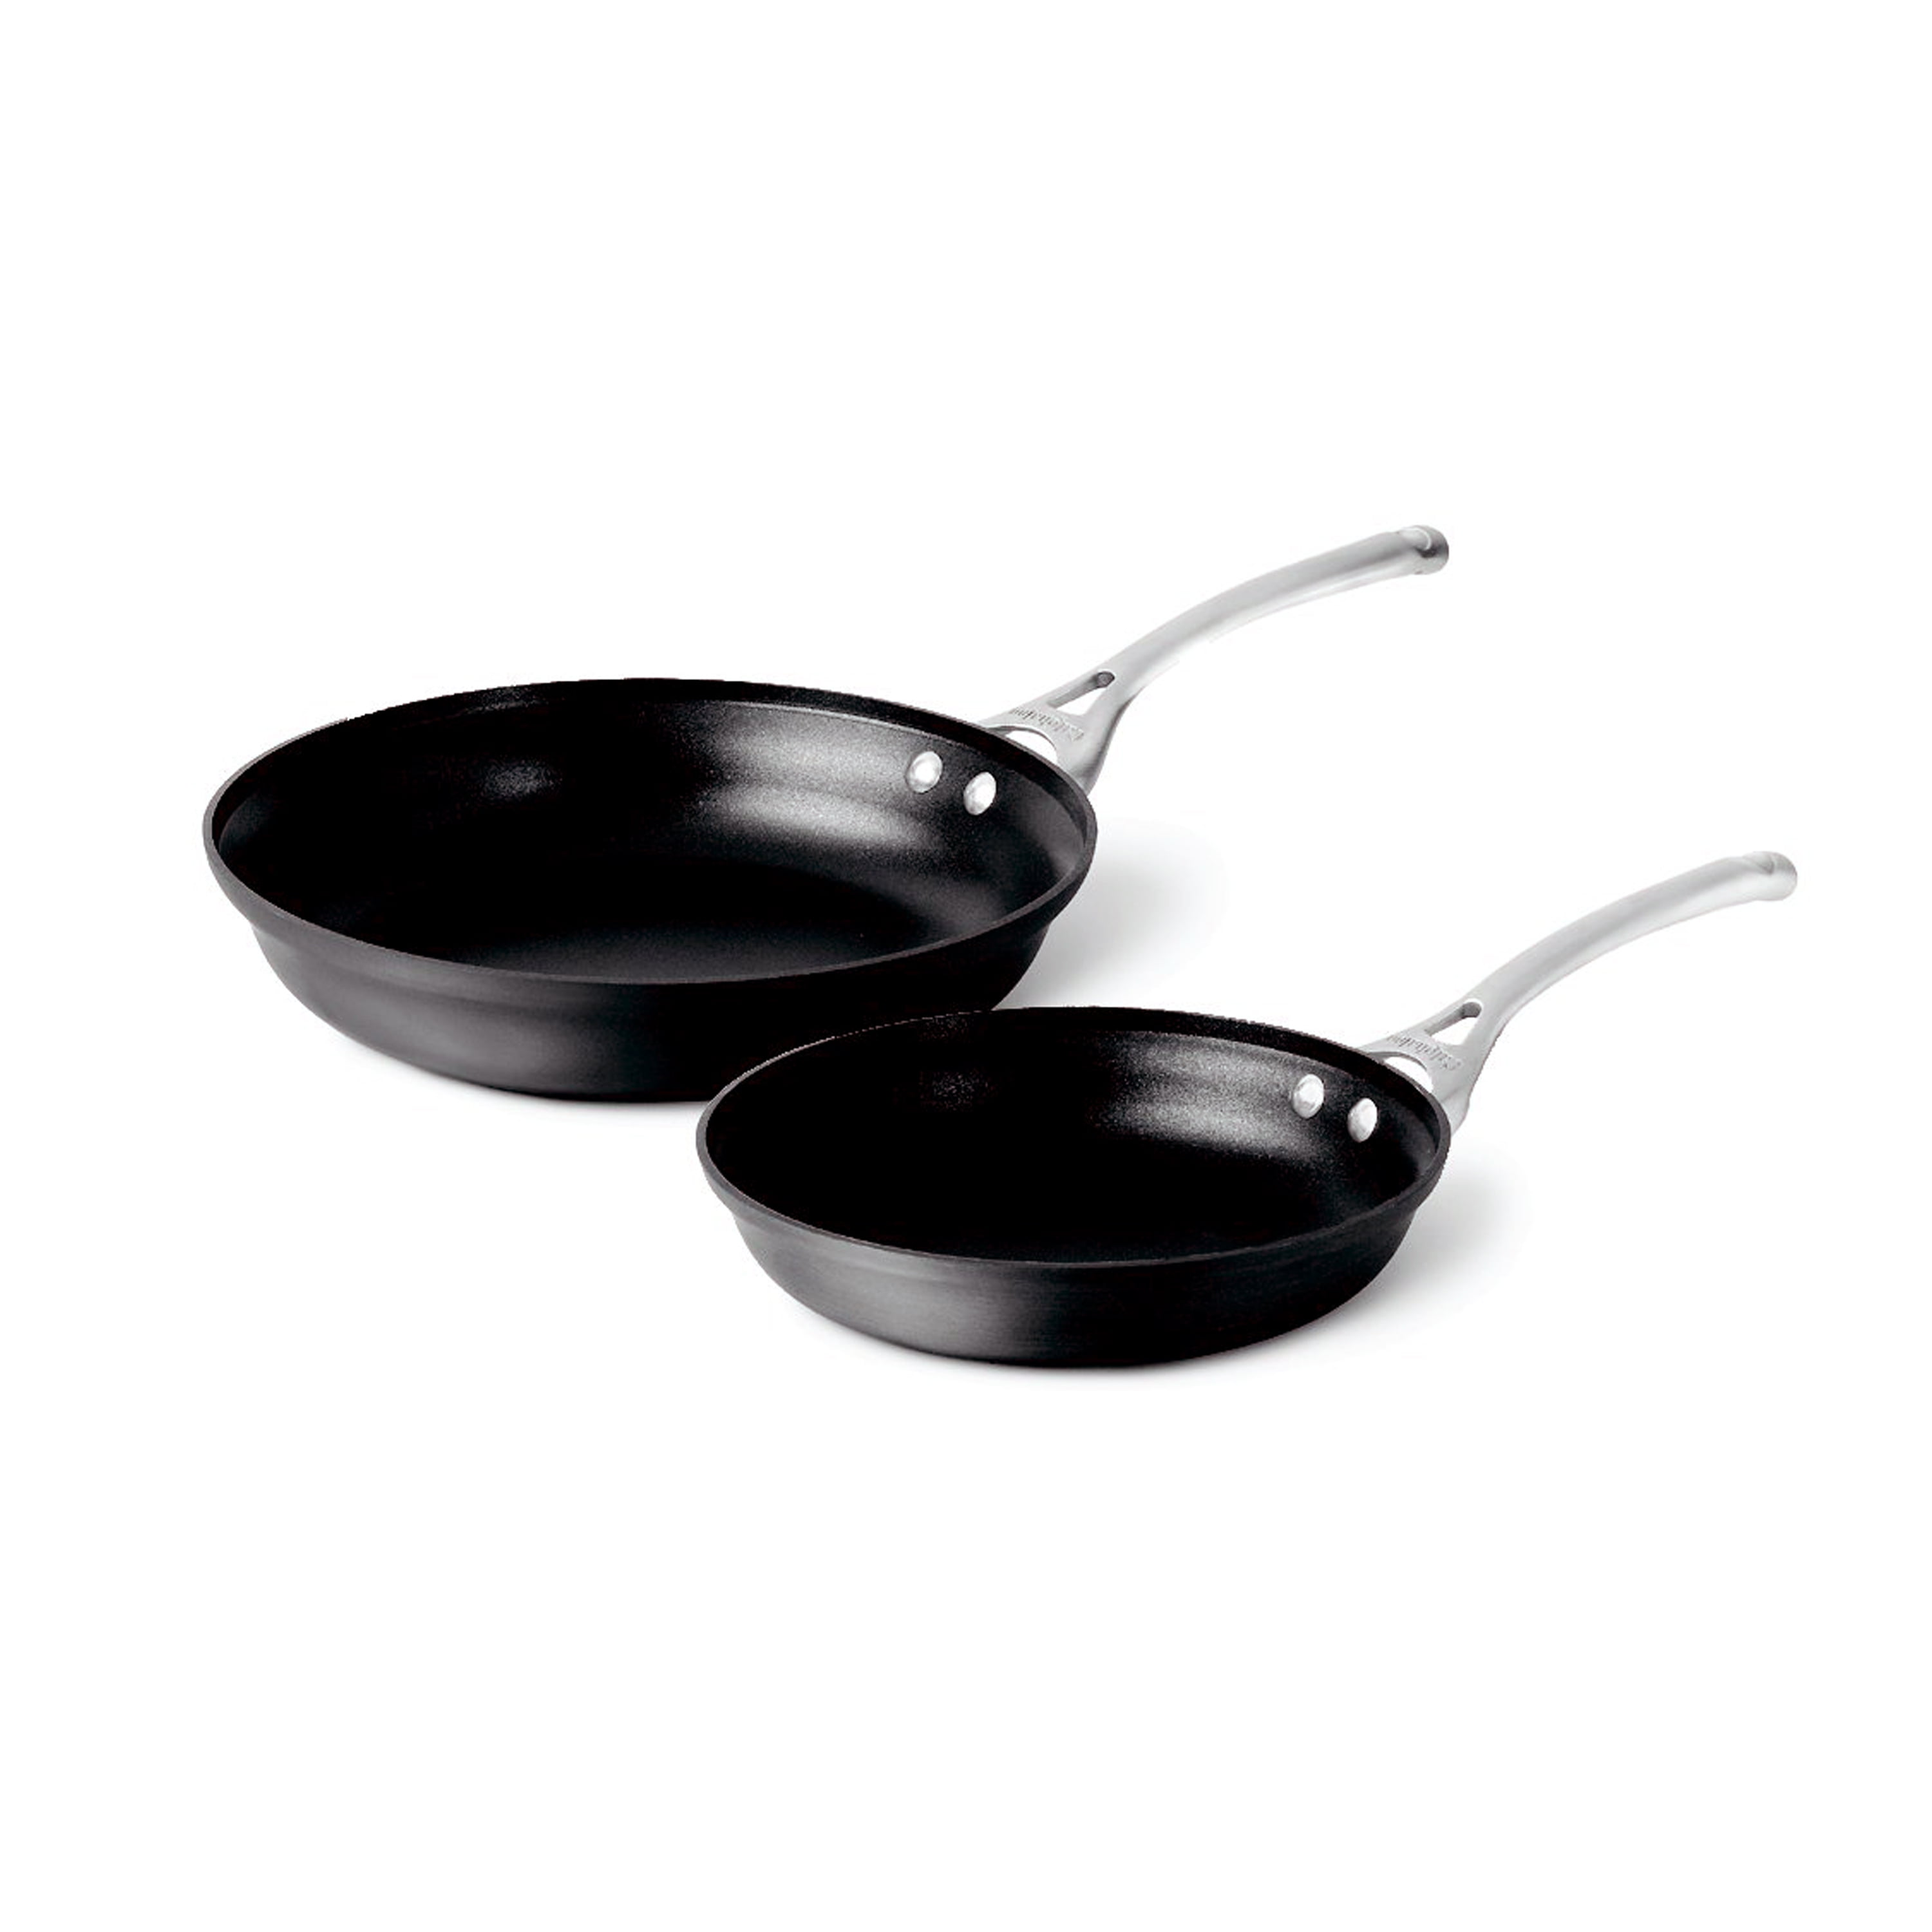  Calphalon Nonstick Frying Pan with Lid and Stay-Cool Handles,  Dishwasher and Metal Utensil Safe, PFOA-Free, 12-Inch, Black: Home & Kitchen